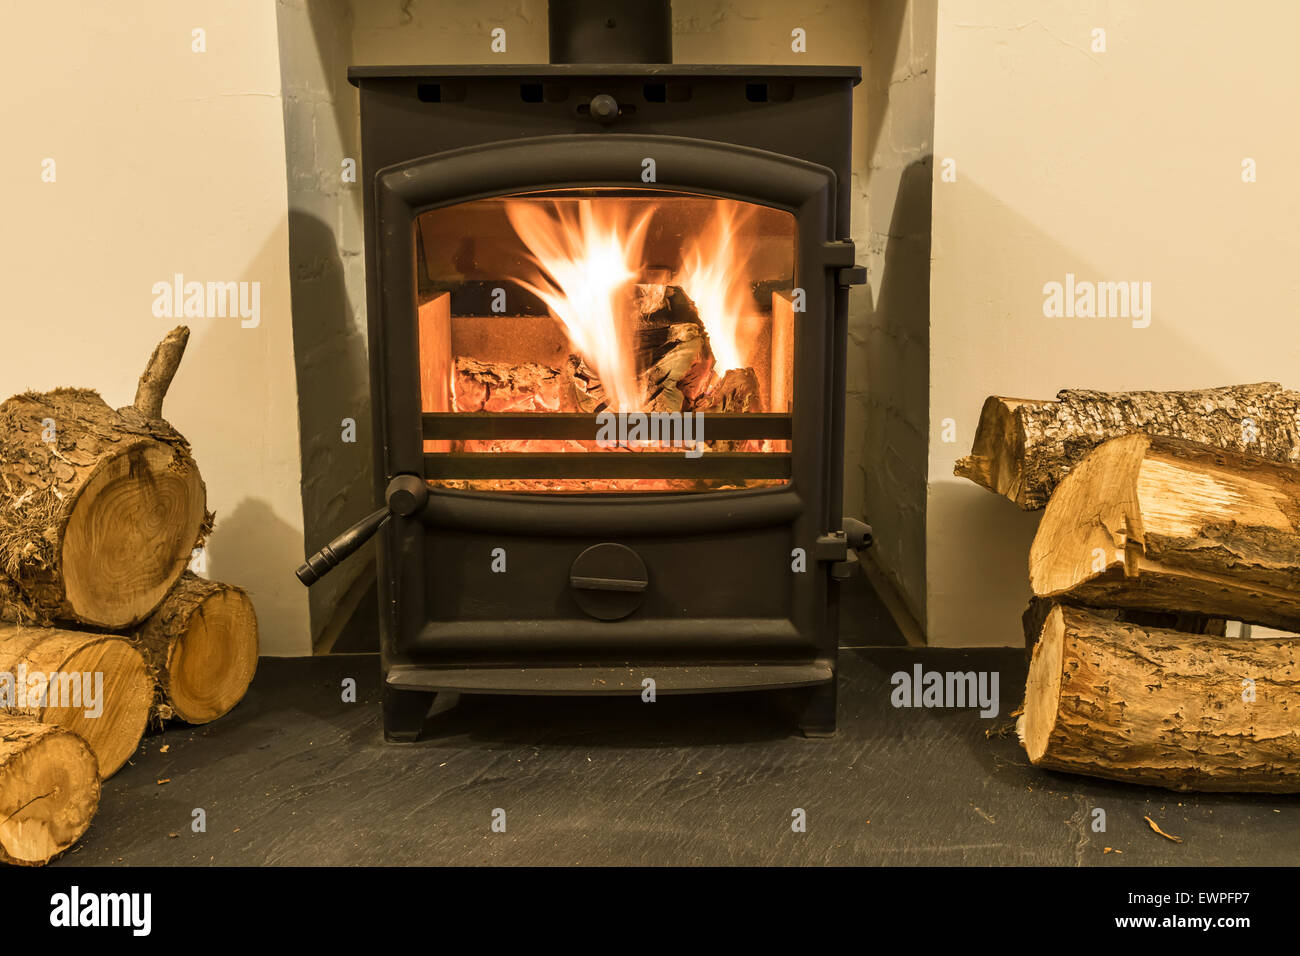 Hetas approved Wood burning stove Stock Photo